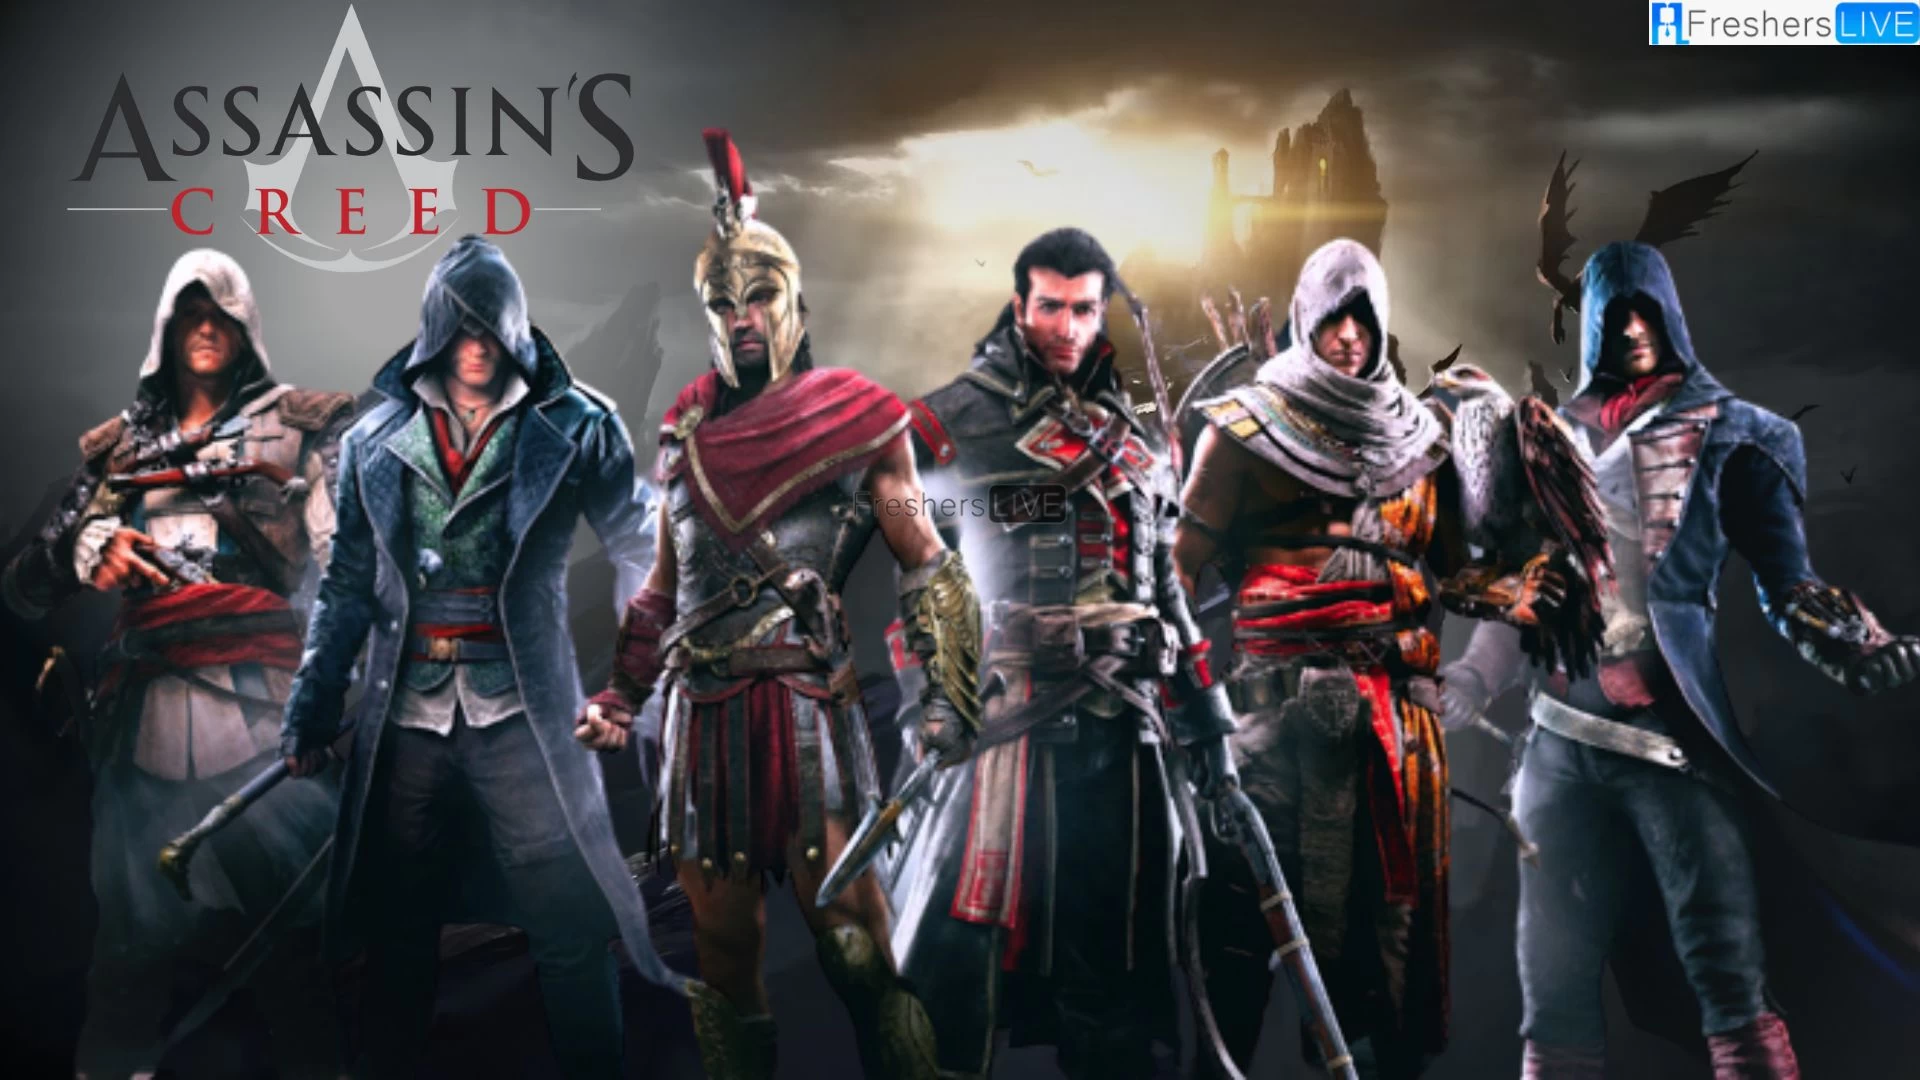 Assassin's Creed Games in Order, How to Play the Assassin's Creed Games in Chronological Order?